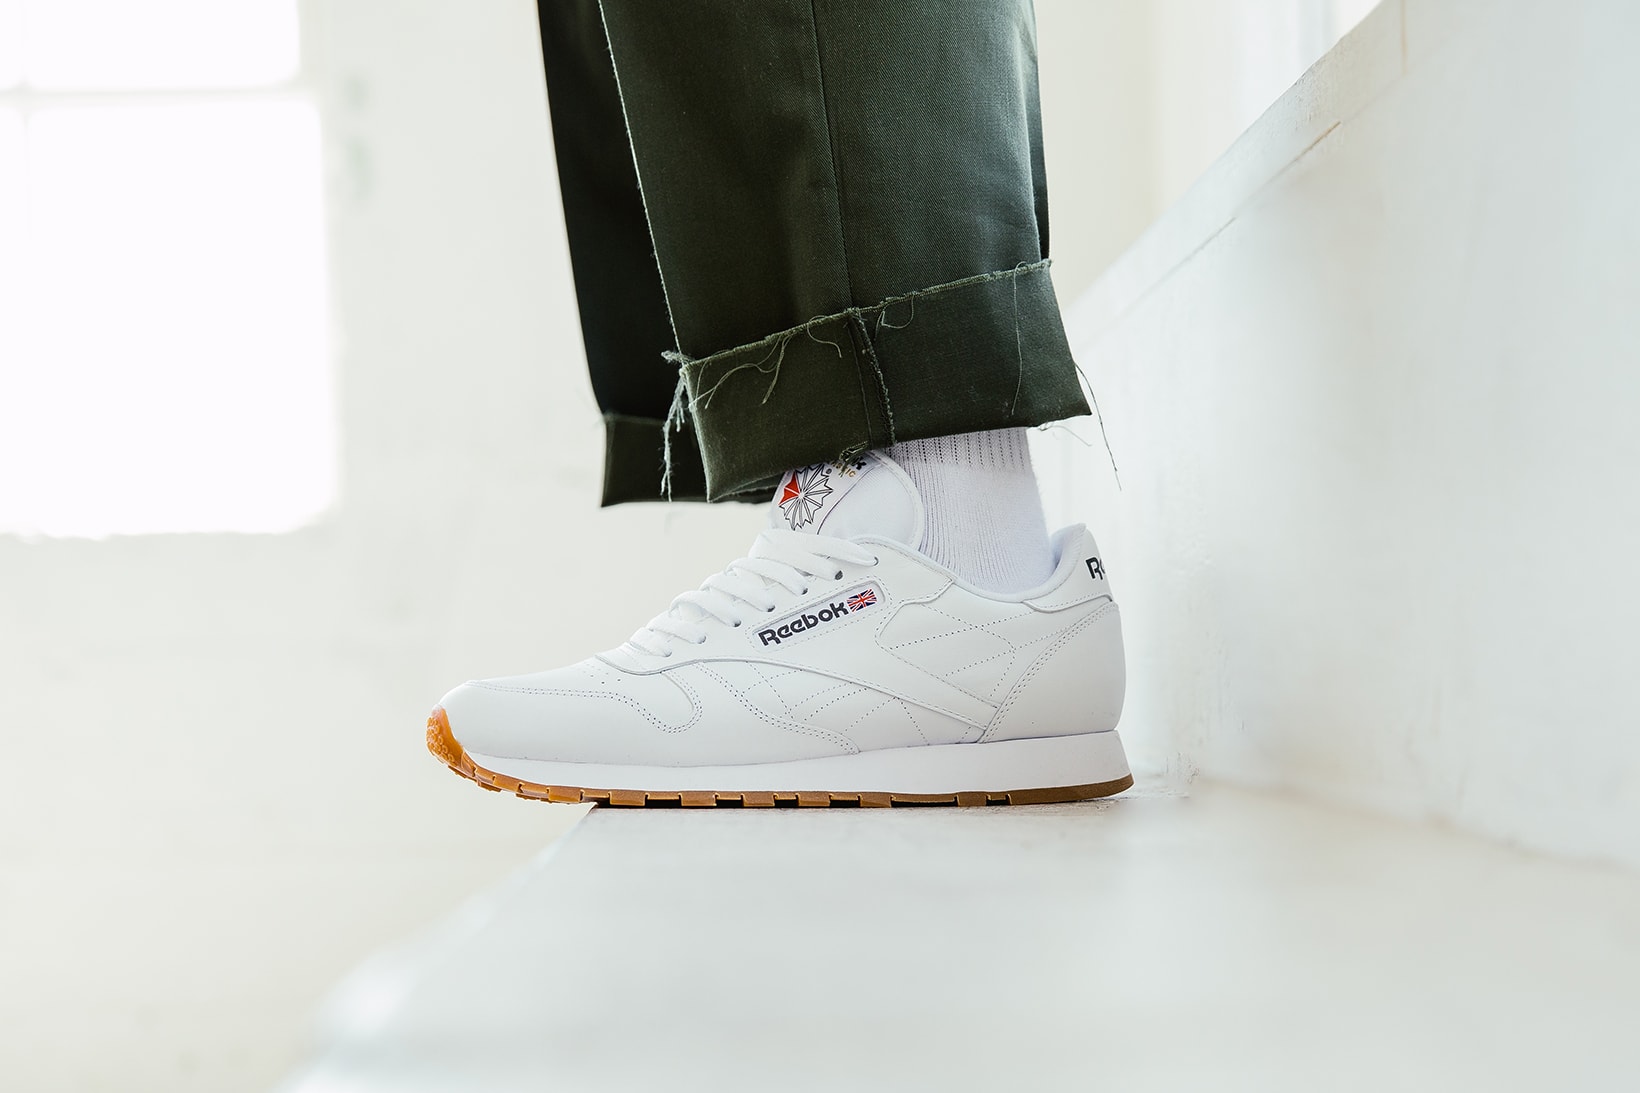 Reebok Classic Leather in white side profile